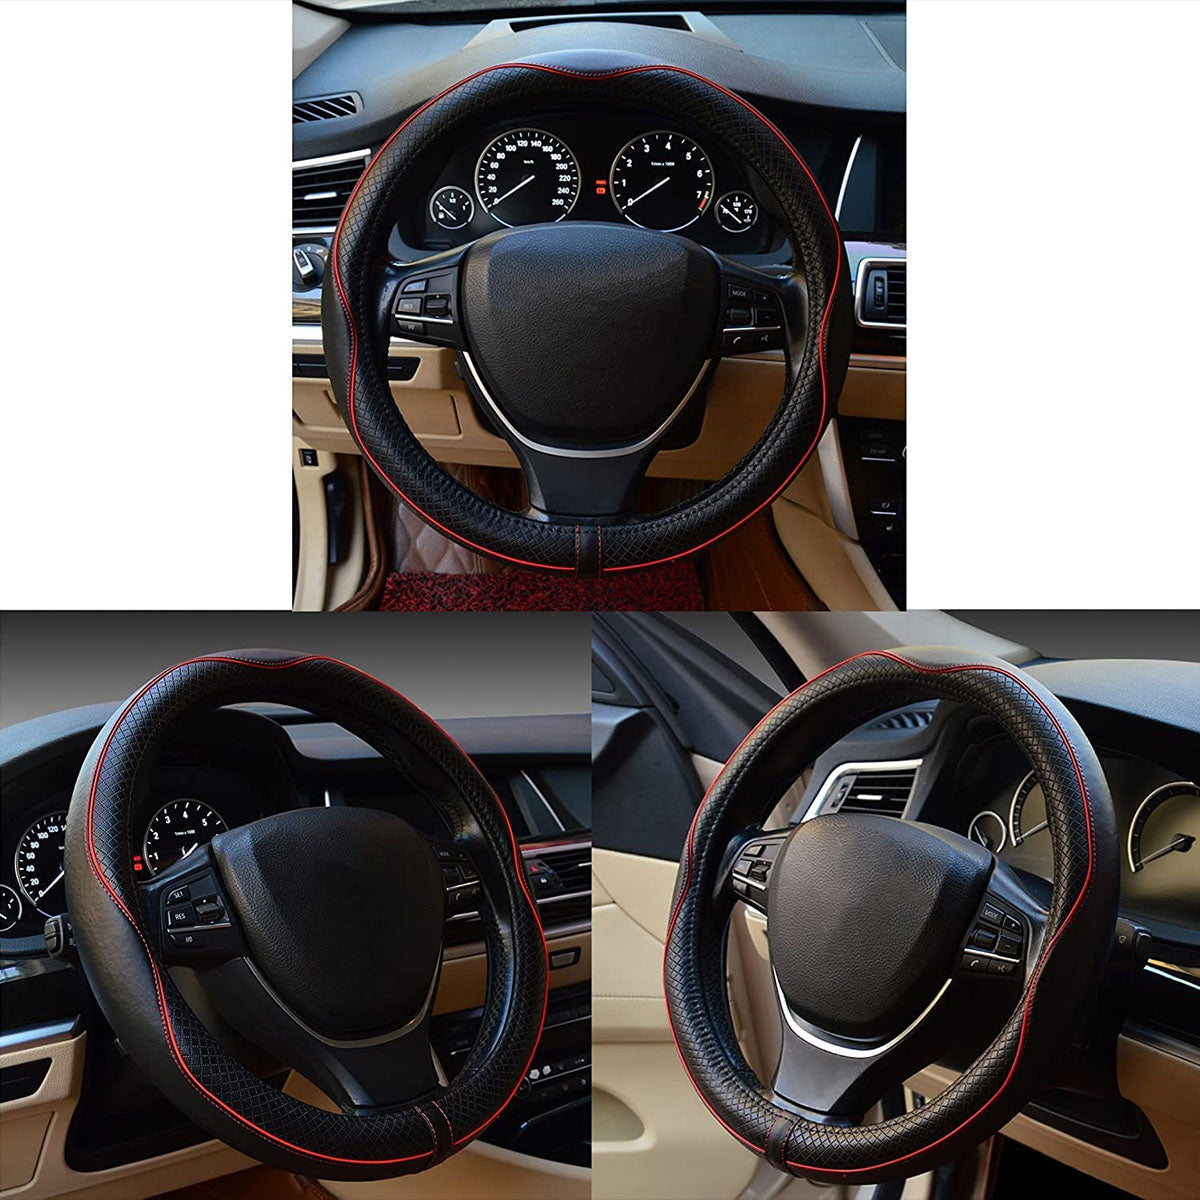 Car Steering Wheel Cover, Custom For Your Cars, Anti-Slip, Safety, Soft, Breathable, Heavy Duty, Thick, Full Surround, Sports Style, Car Accessories JG18990